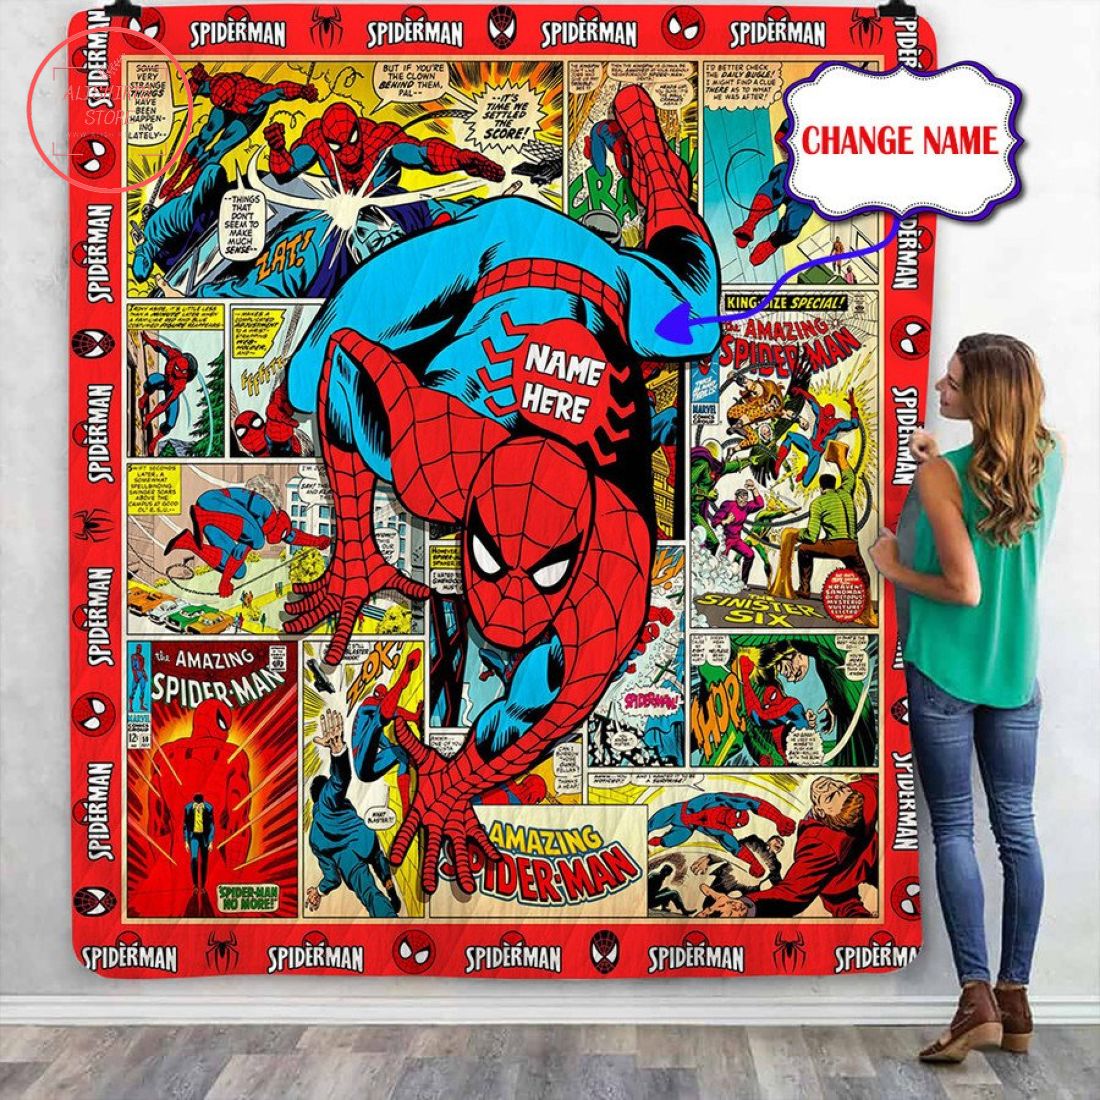 Spiderman Comic Personalized Quilt Blanket